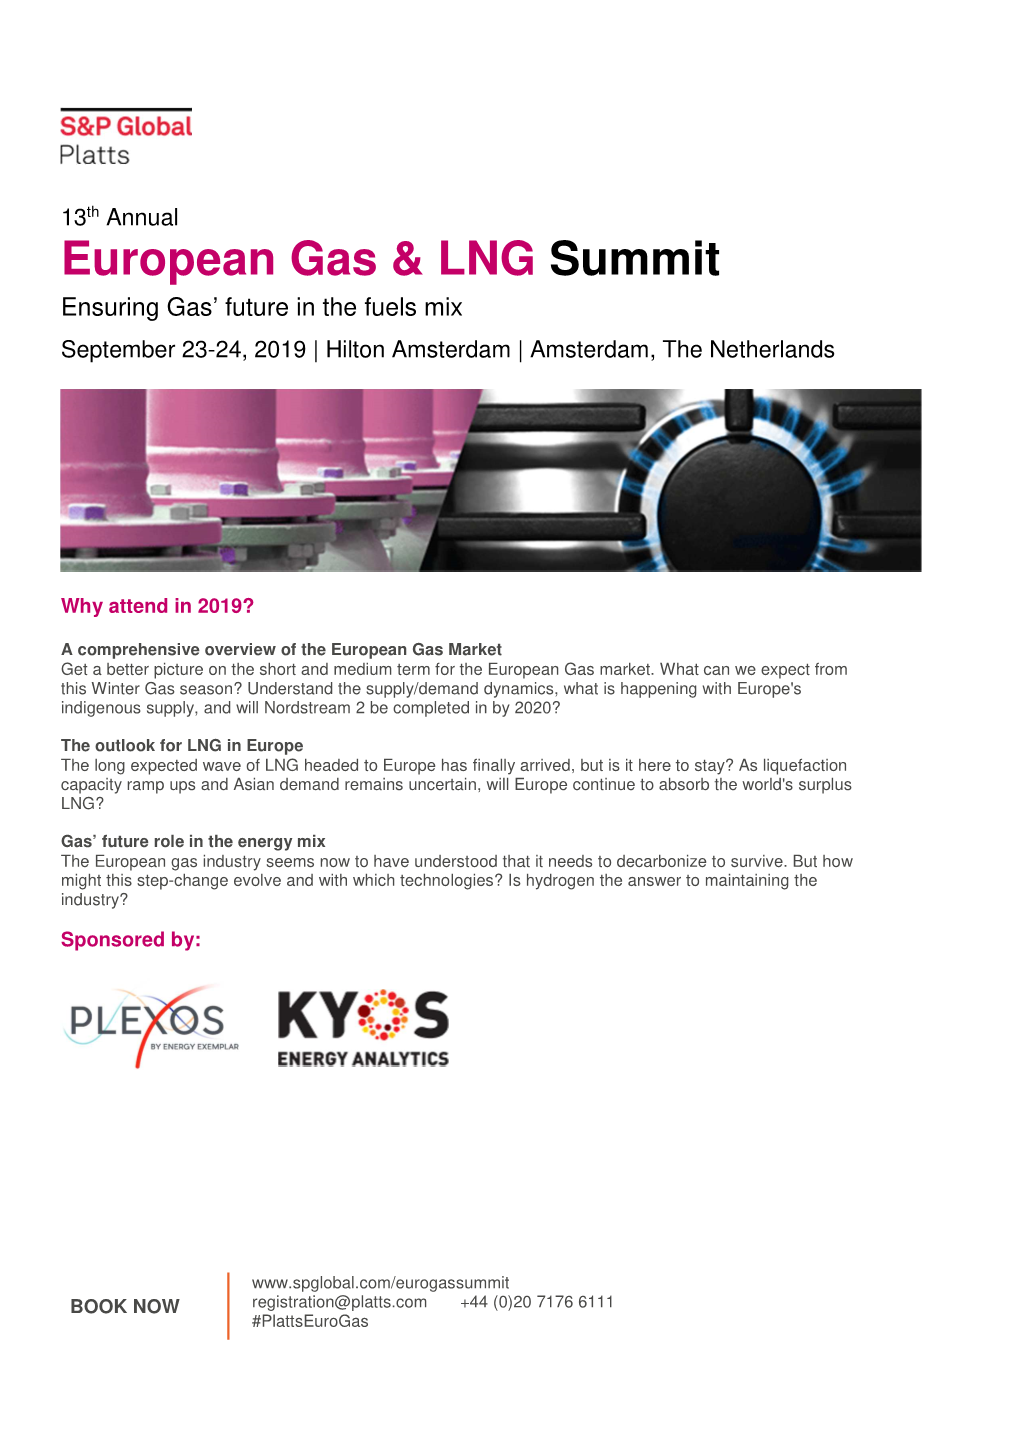 European Gas and LNG Summit